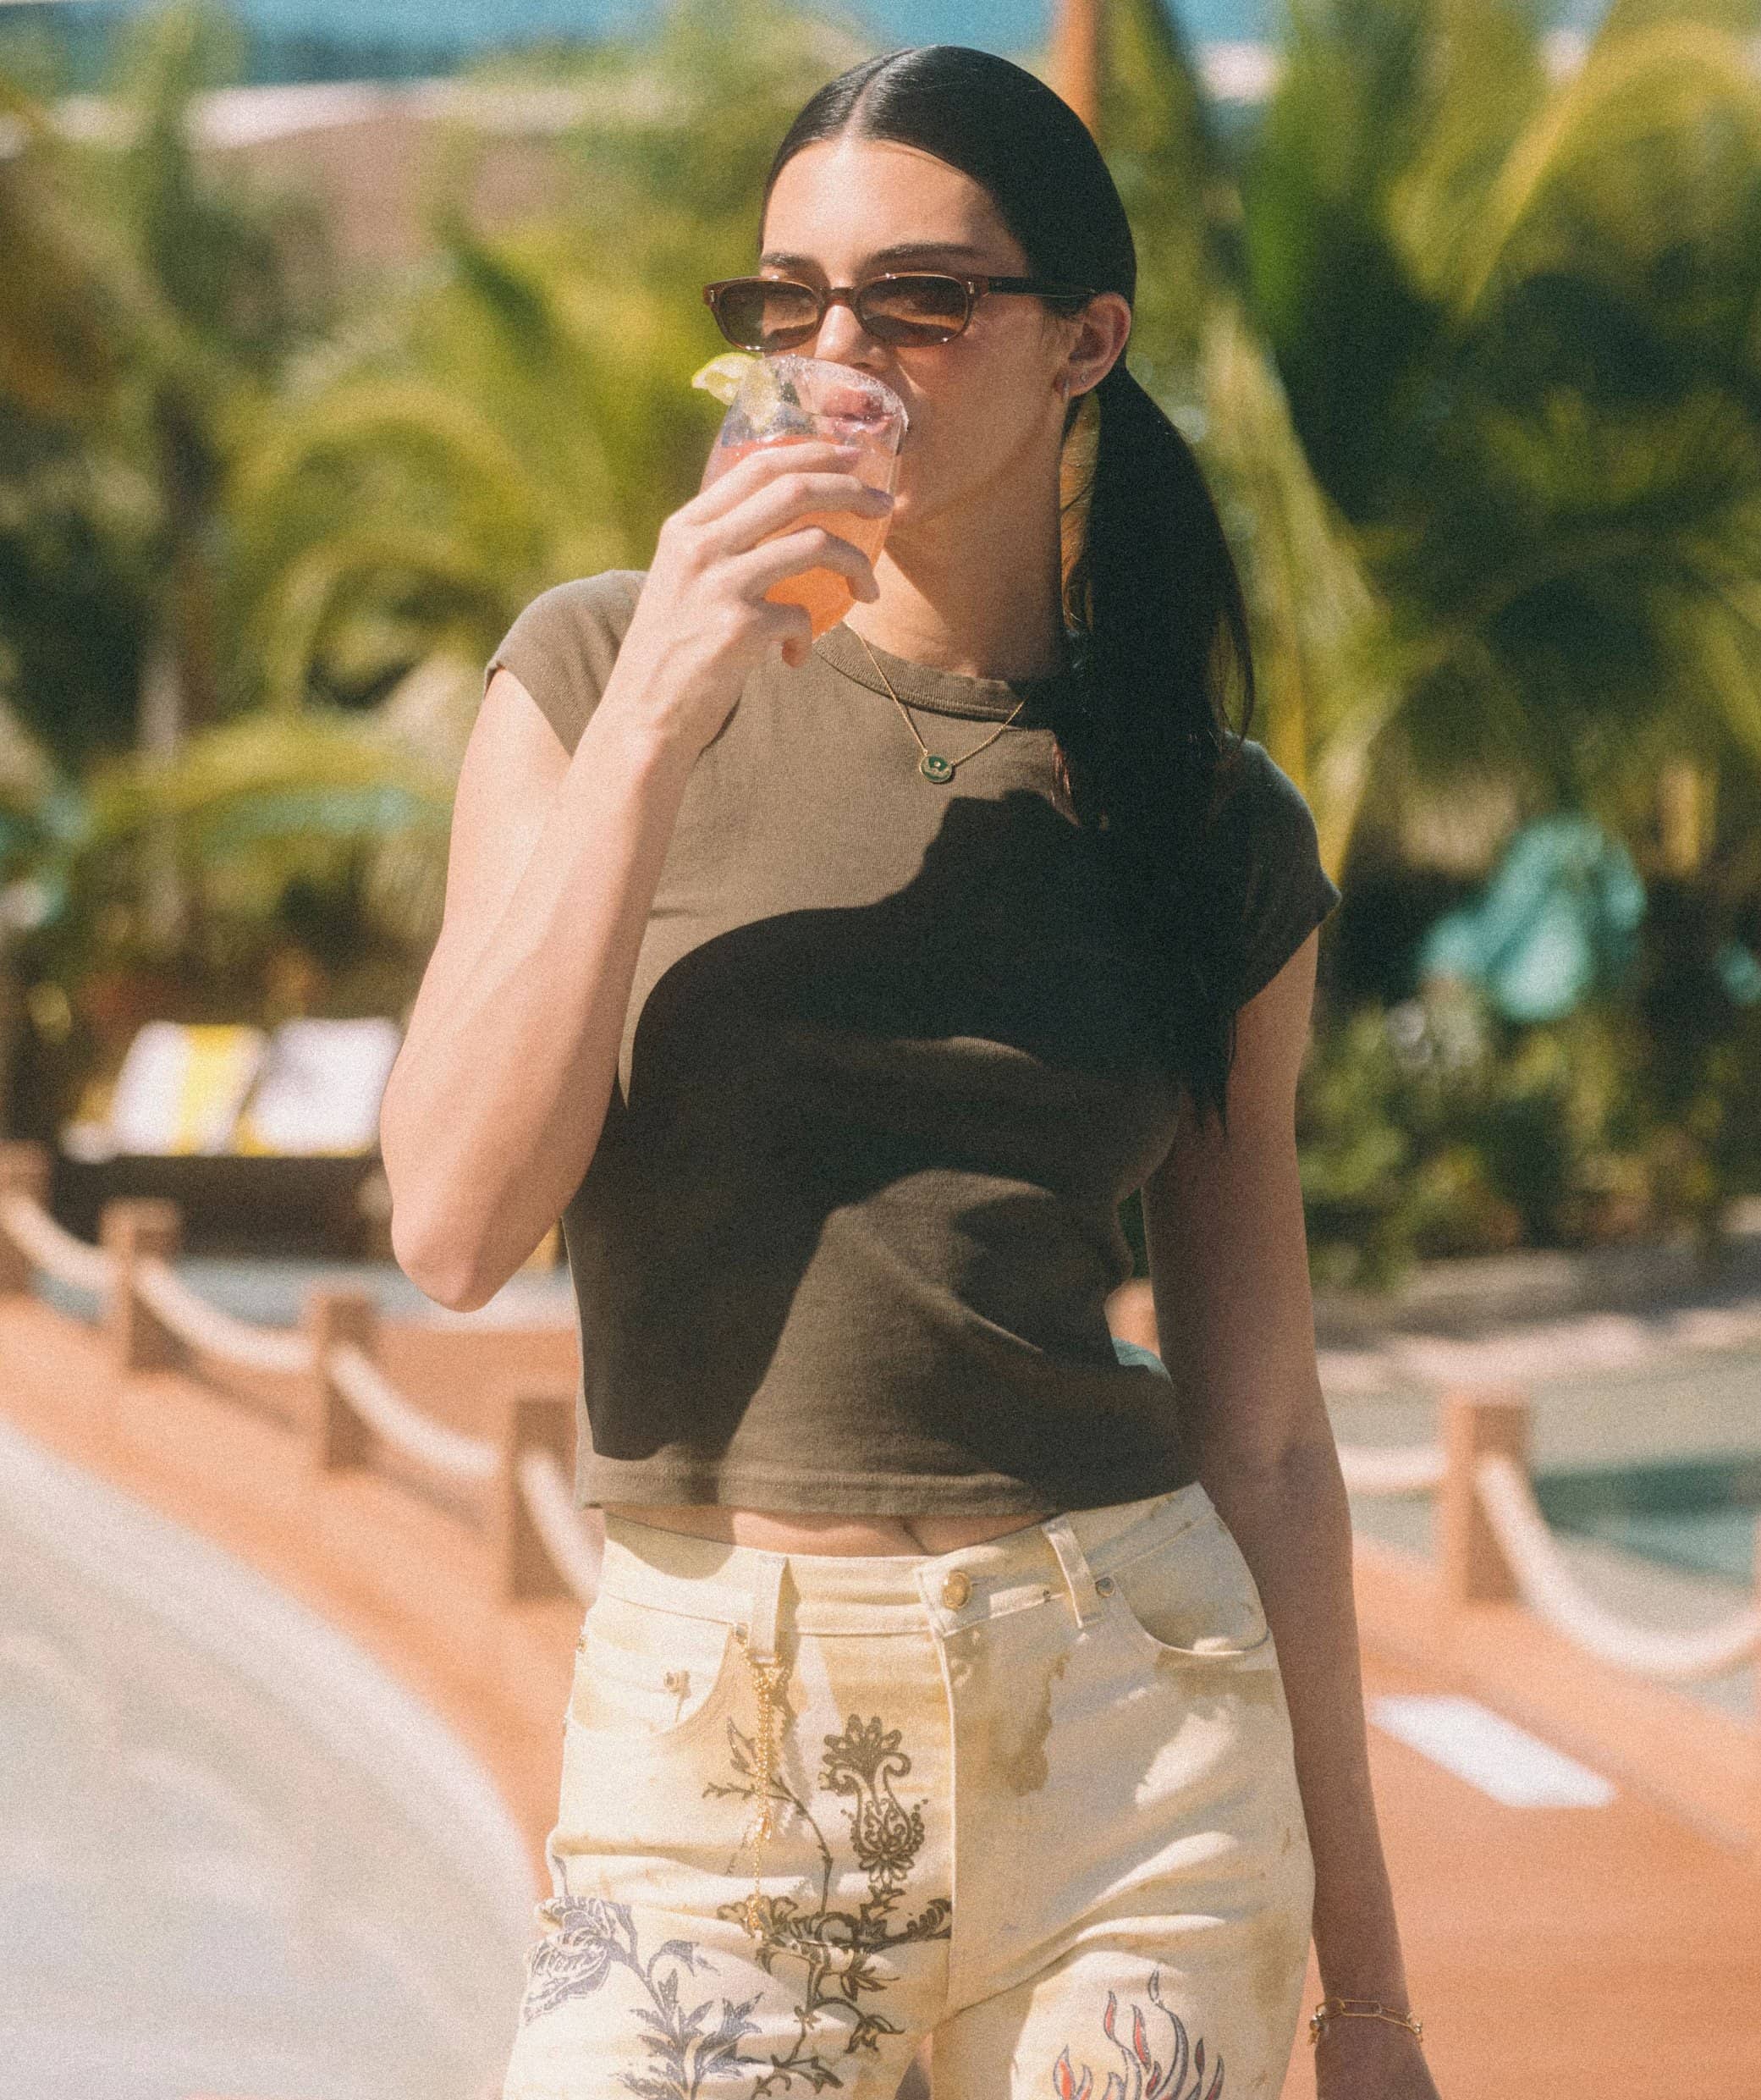 Kendall Jenner styles her hair in pigtails as she takes a sip of her 818 Tequila Watermelon Margarita cocktail